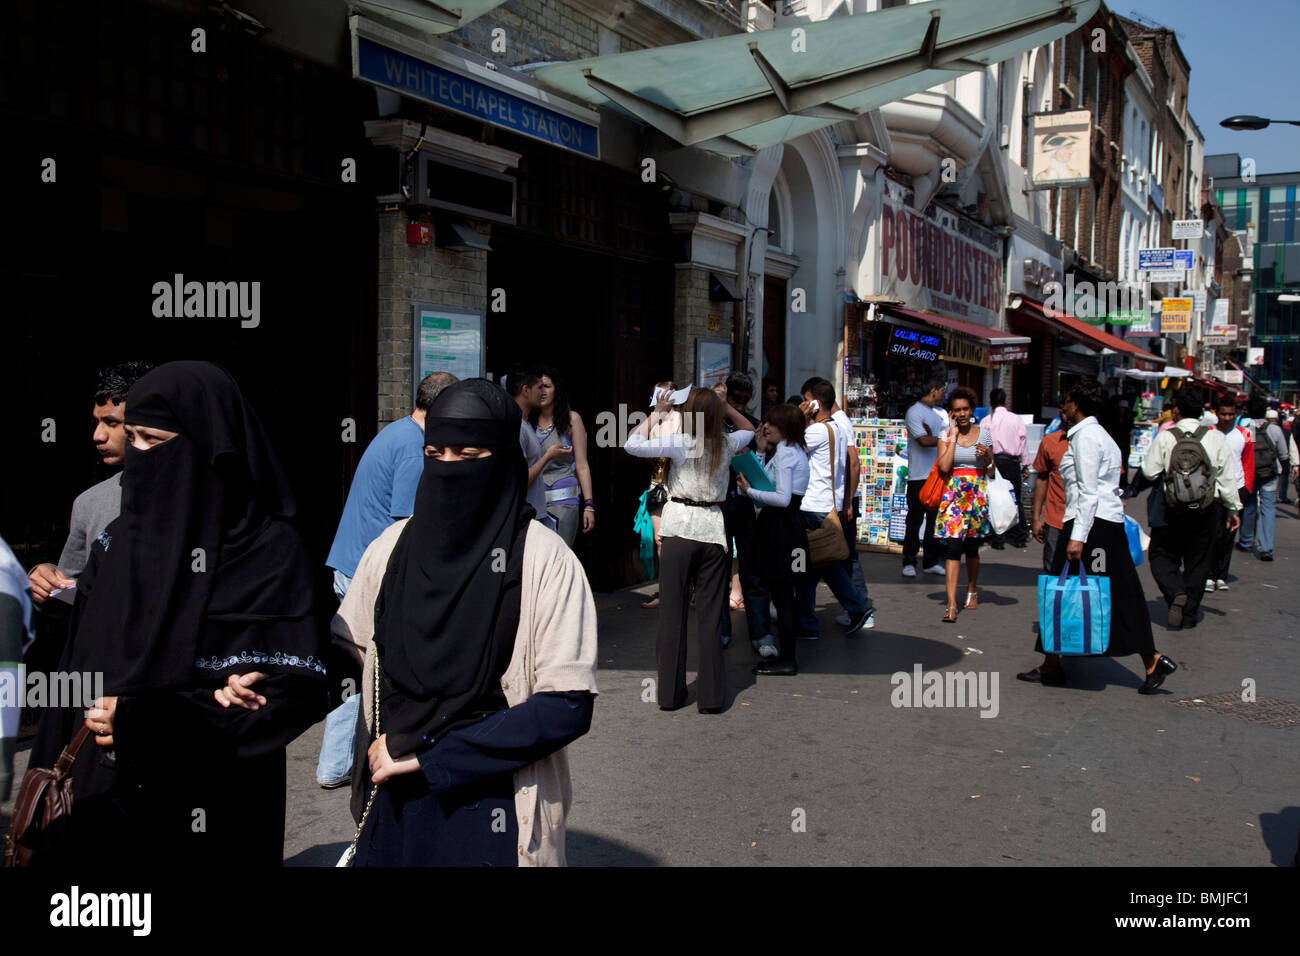 People from various ethnic backgrounds (mainly Muslim) around the market on Whitechapel High Street in East London. Stock Photo